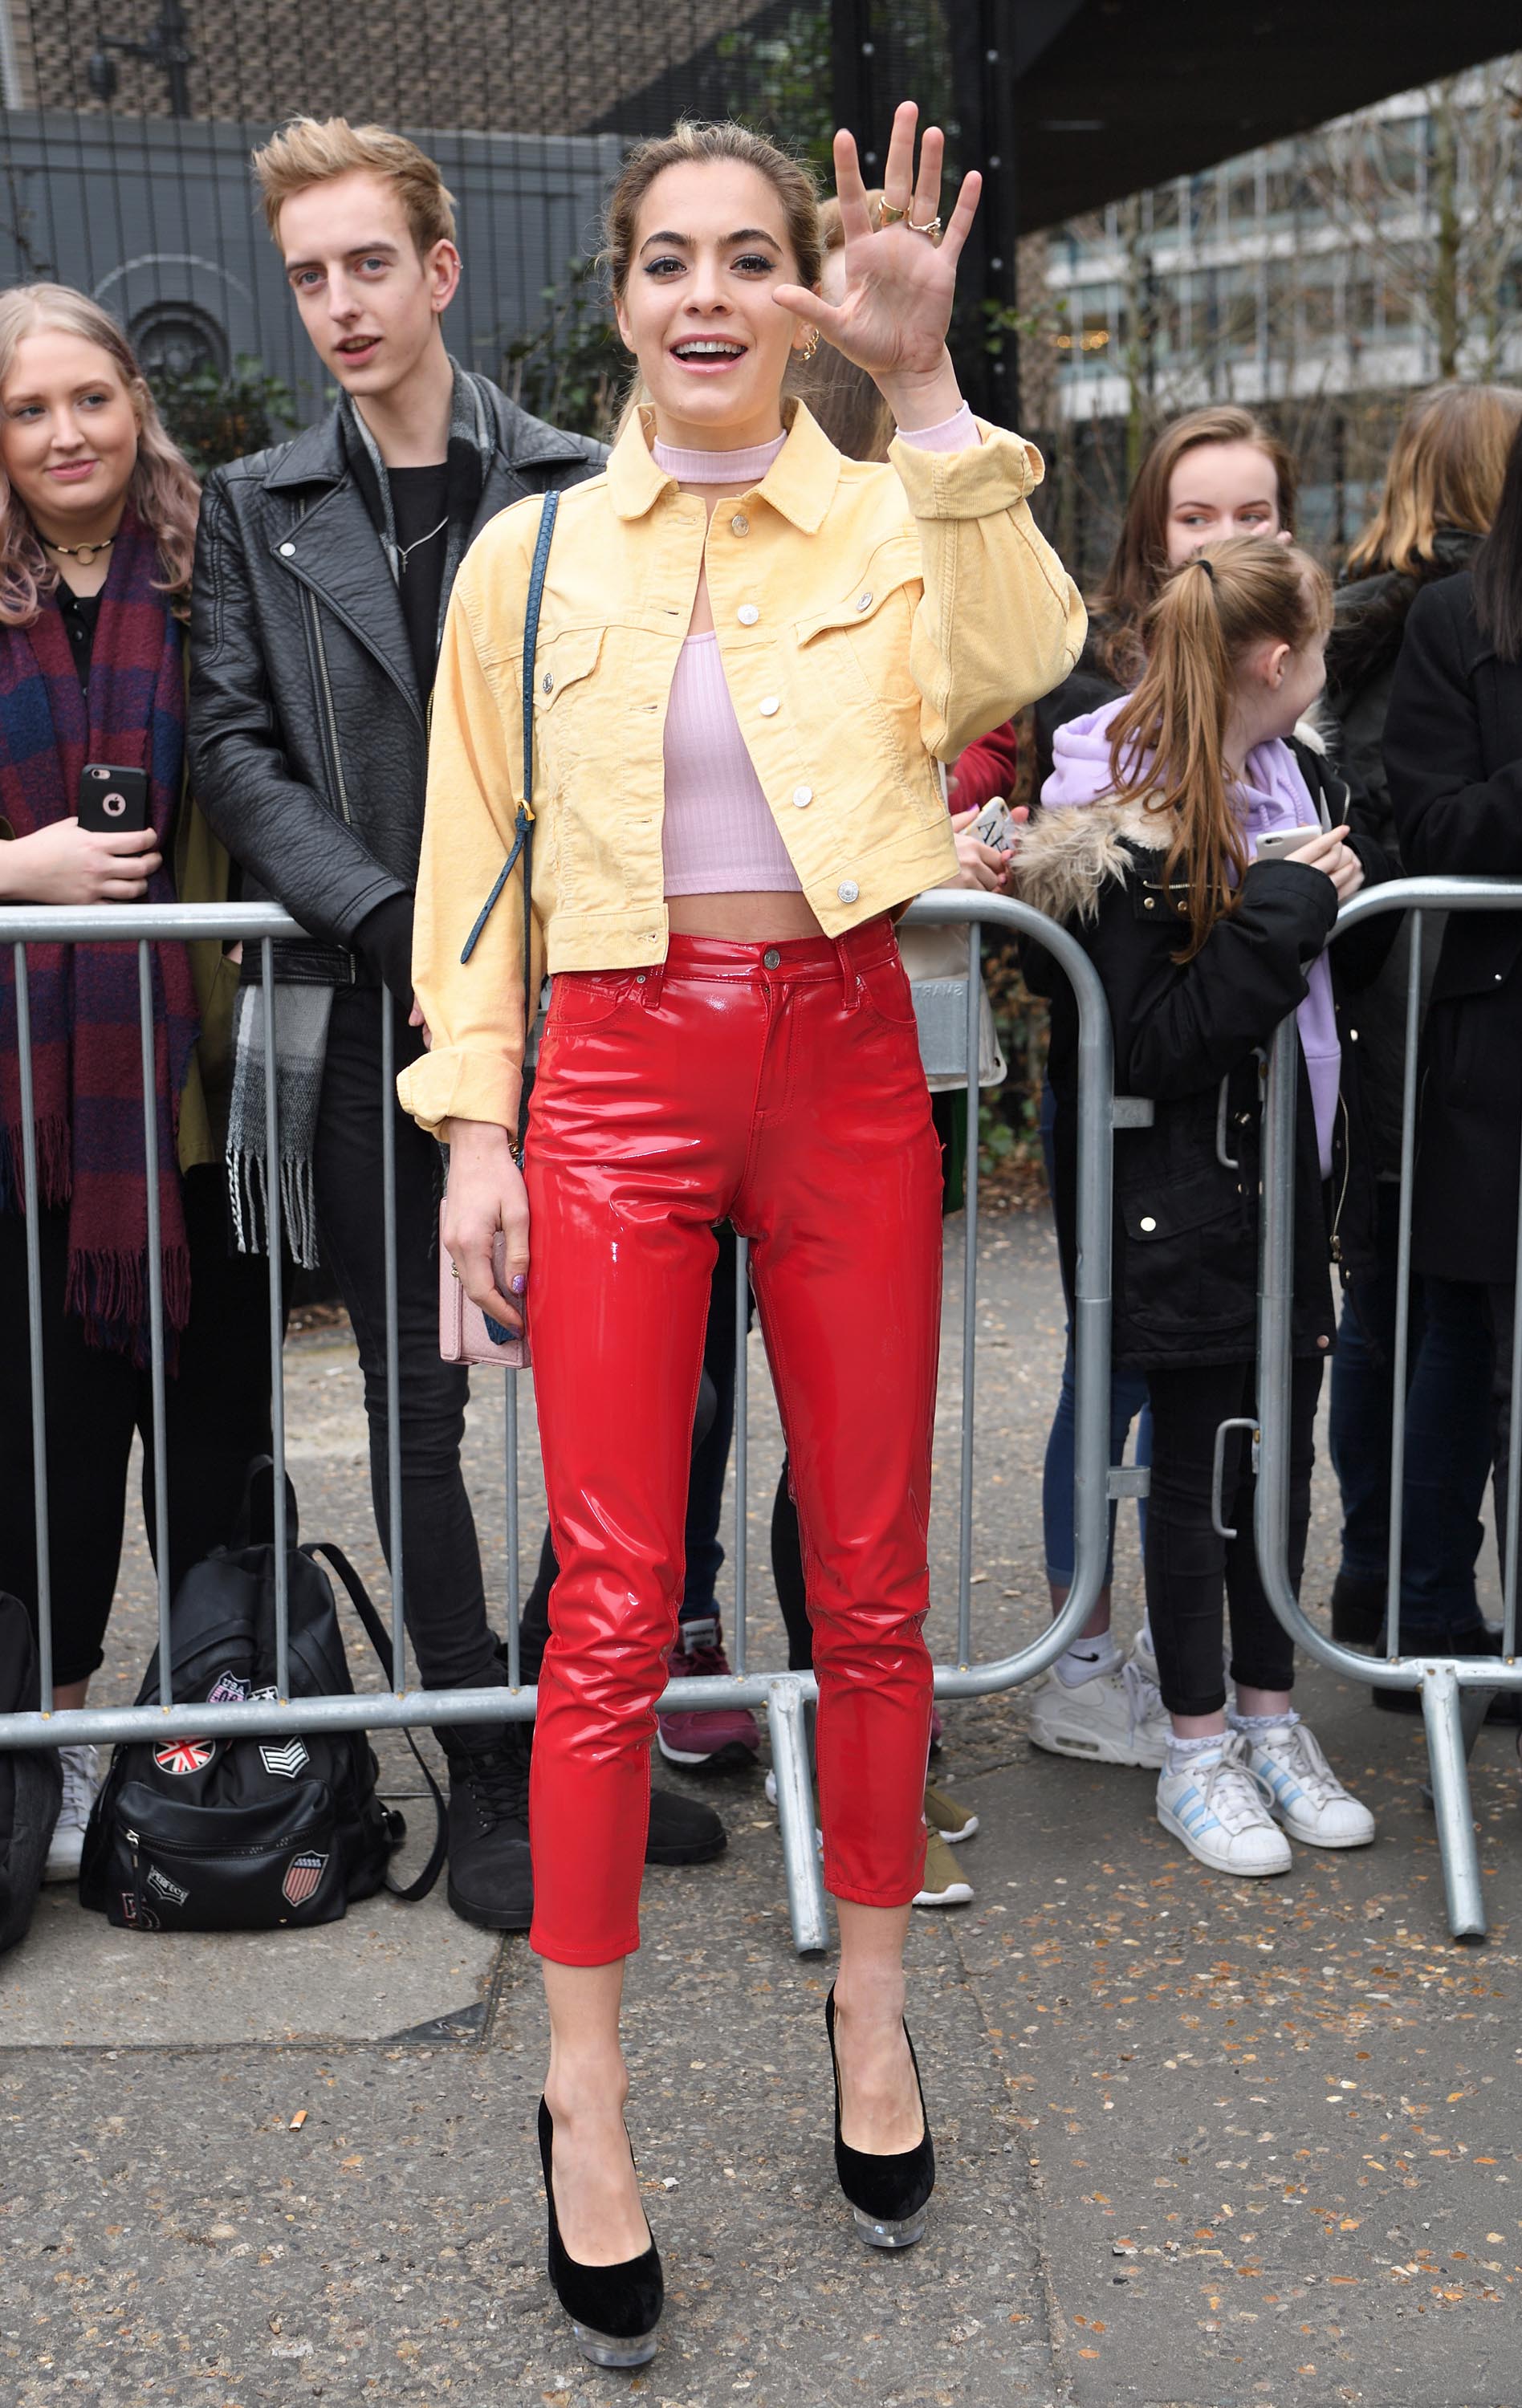 Chelsea Leyland attends Topshop’s London Fashion Week show